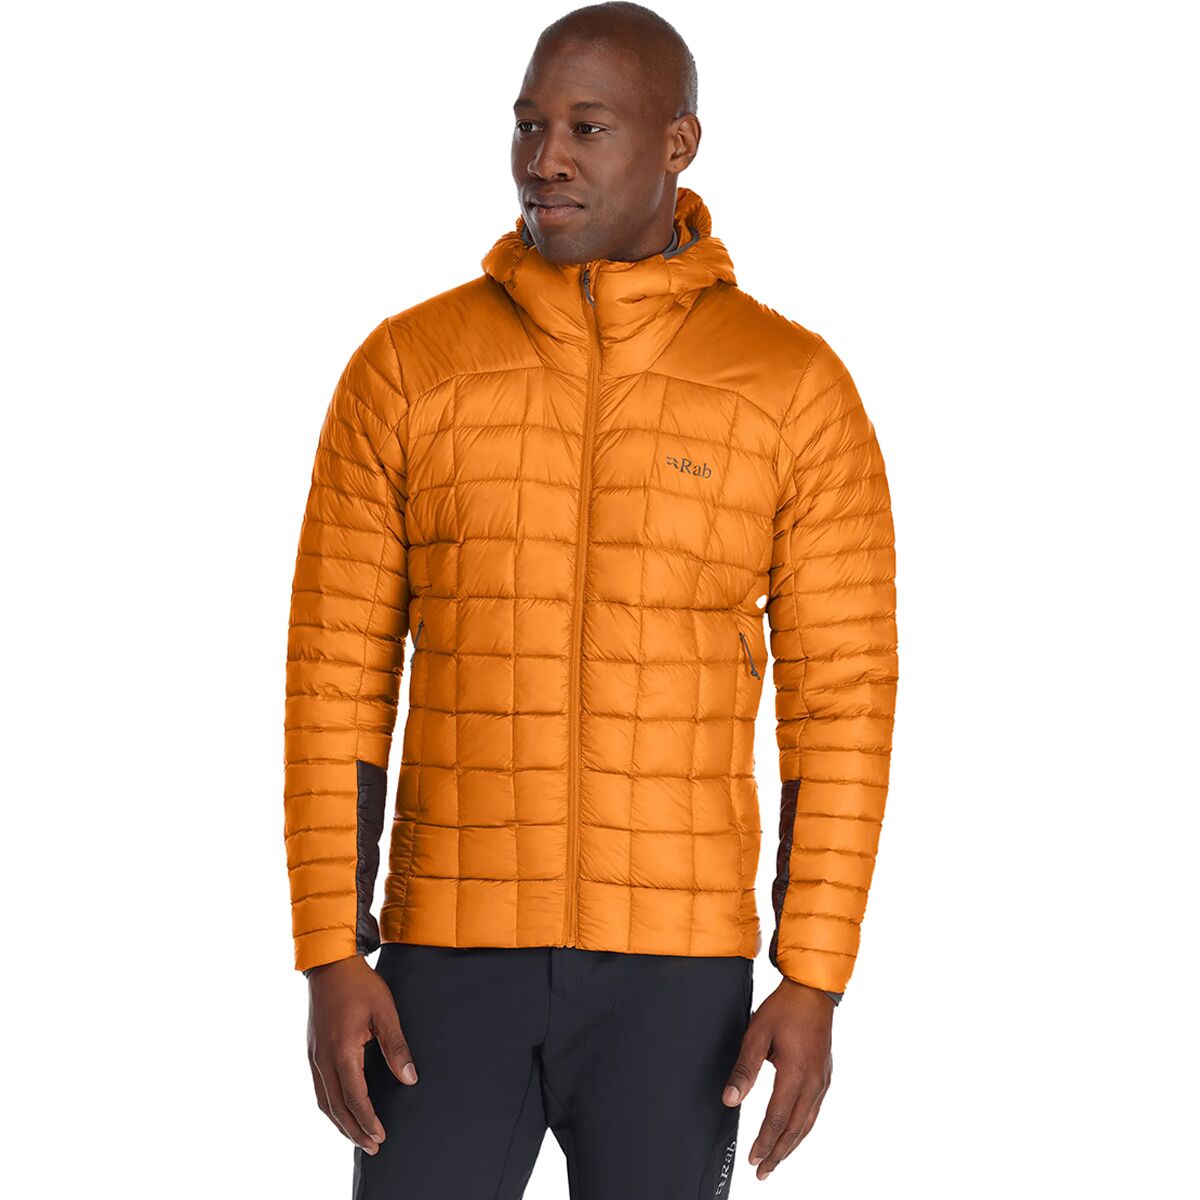 Pre-owned Rab Mythic Alpine Light Jacket - Men's In Marmalade